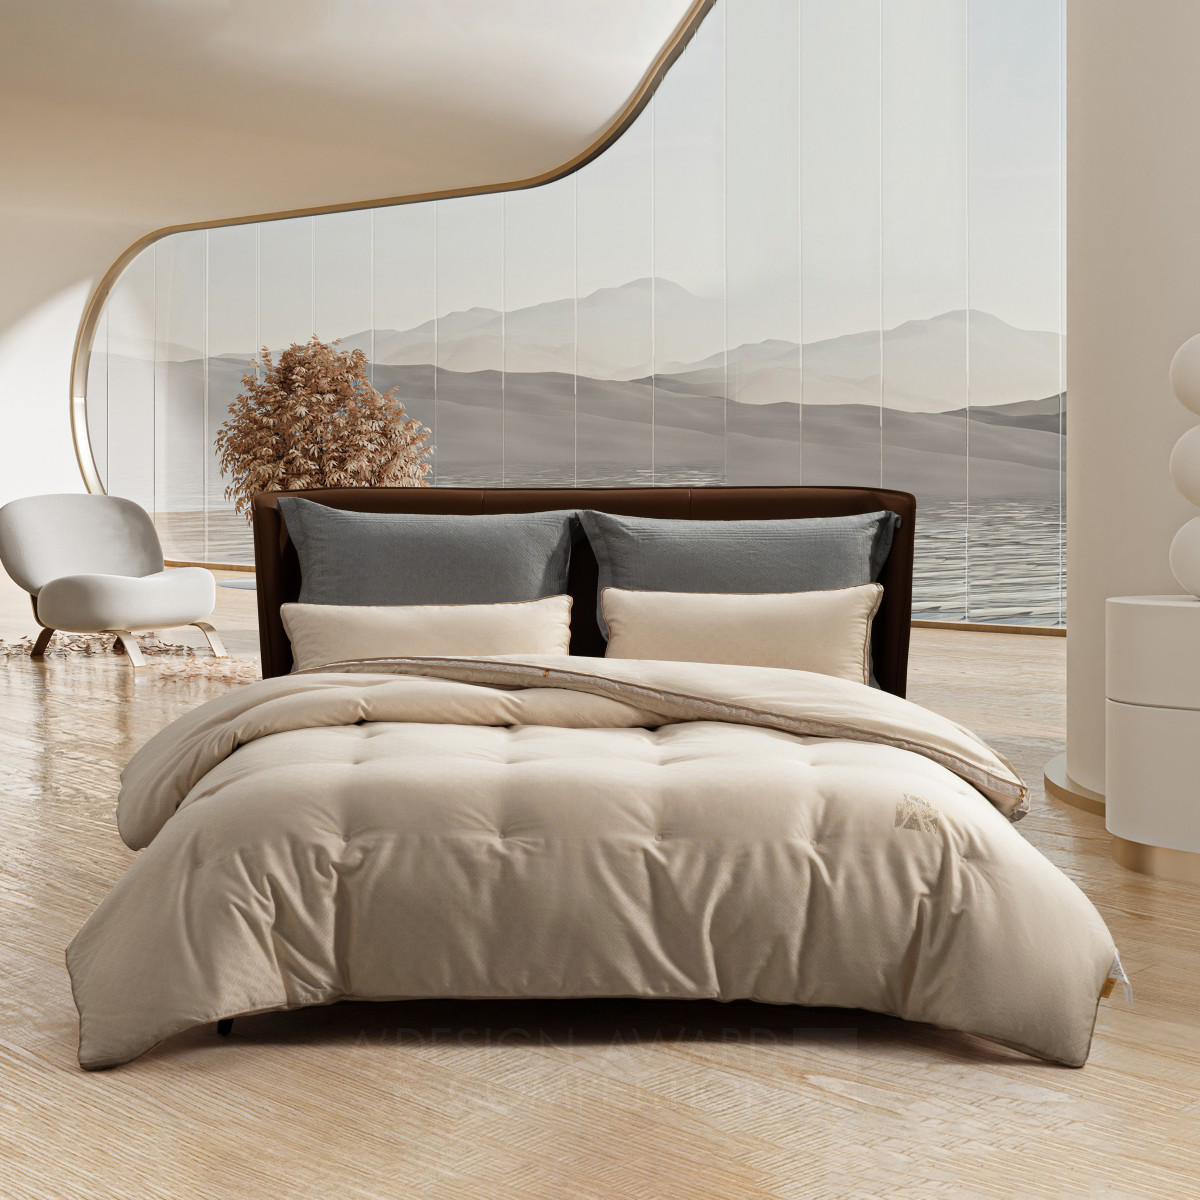 Shuixing Jiafang wins Bronze at the prestigious A' Bedding Design Award with Natural Colored Quilt.